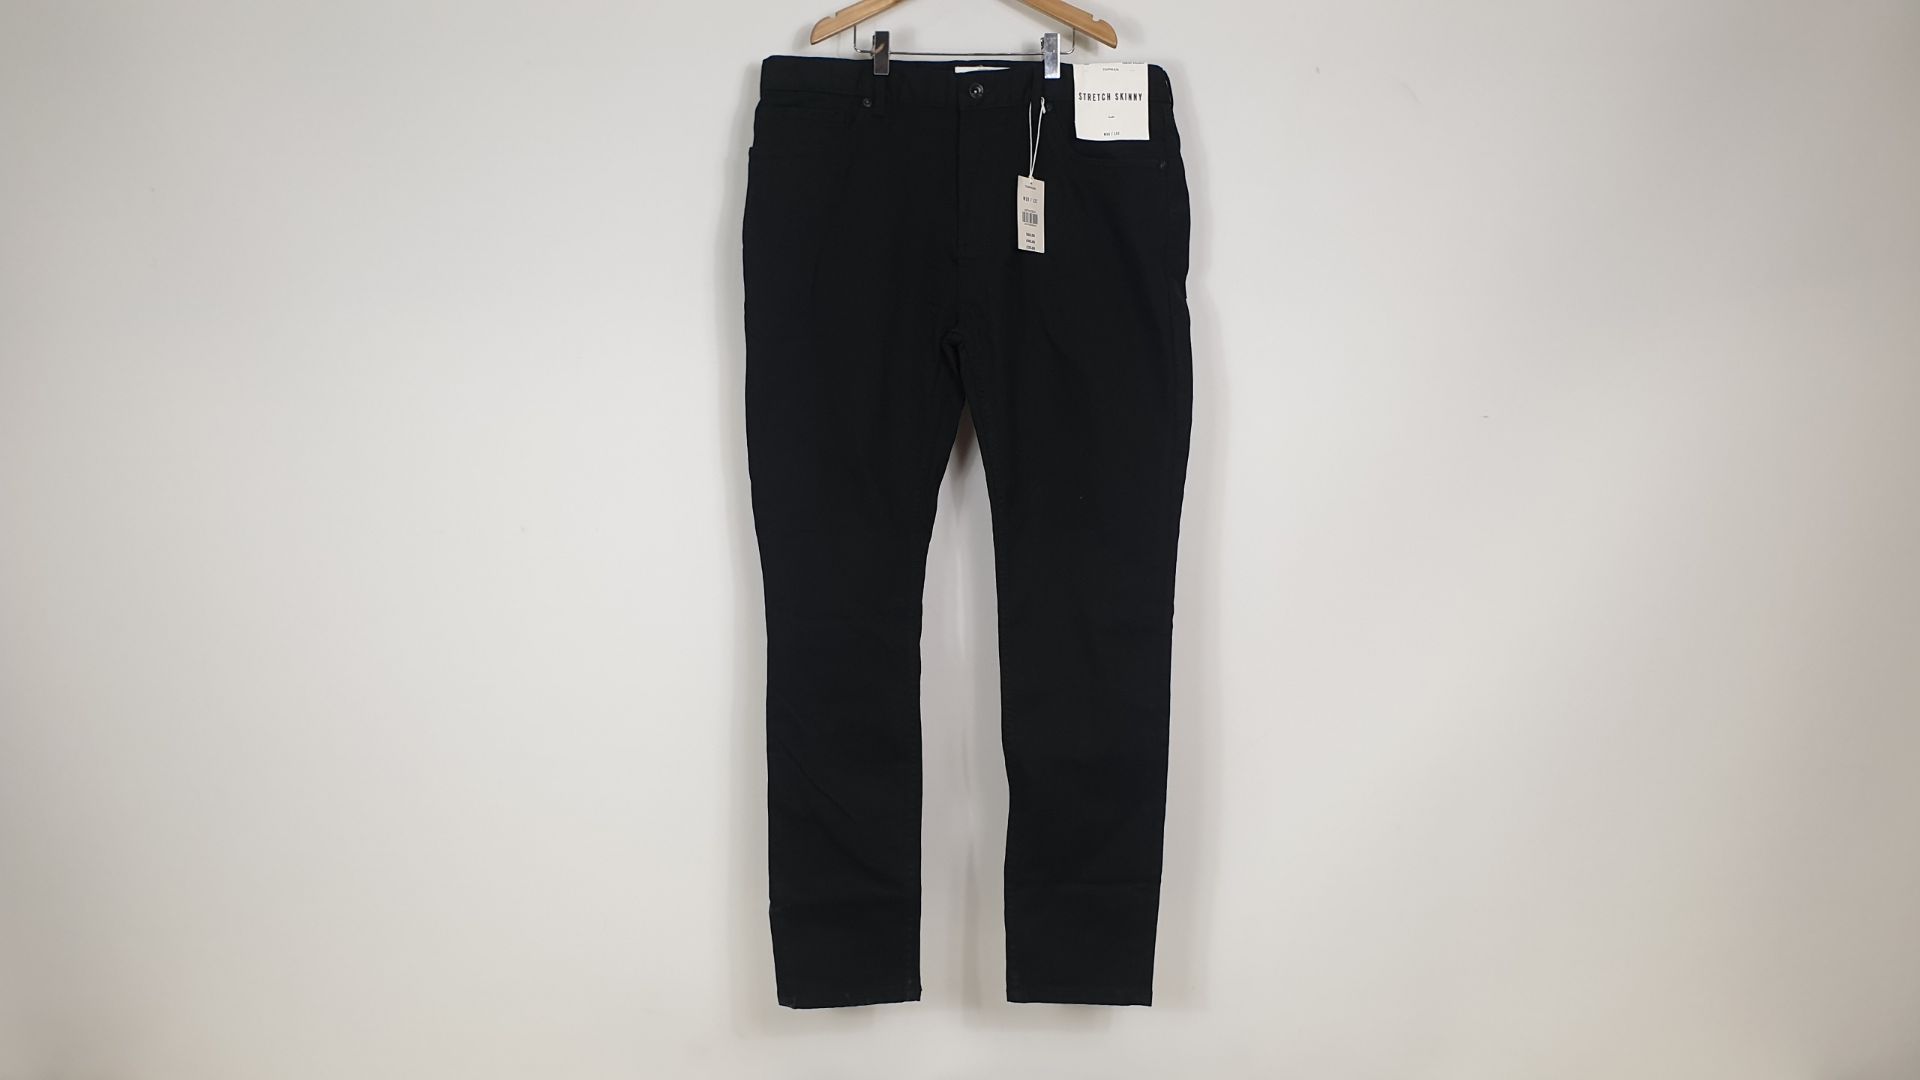 20 X BRAND NEW TOPMAN STRETCH SKINNY BLACK JEANS (RN 125149) - IN VARIOUS SIZES RRP - £30.00pp